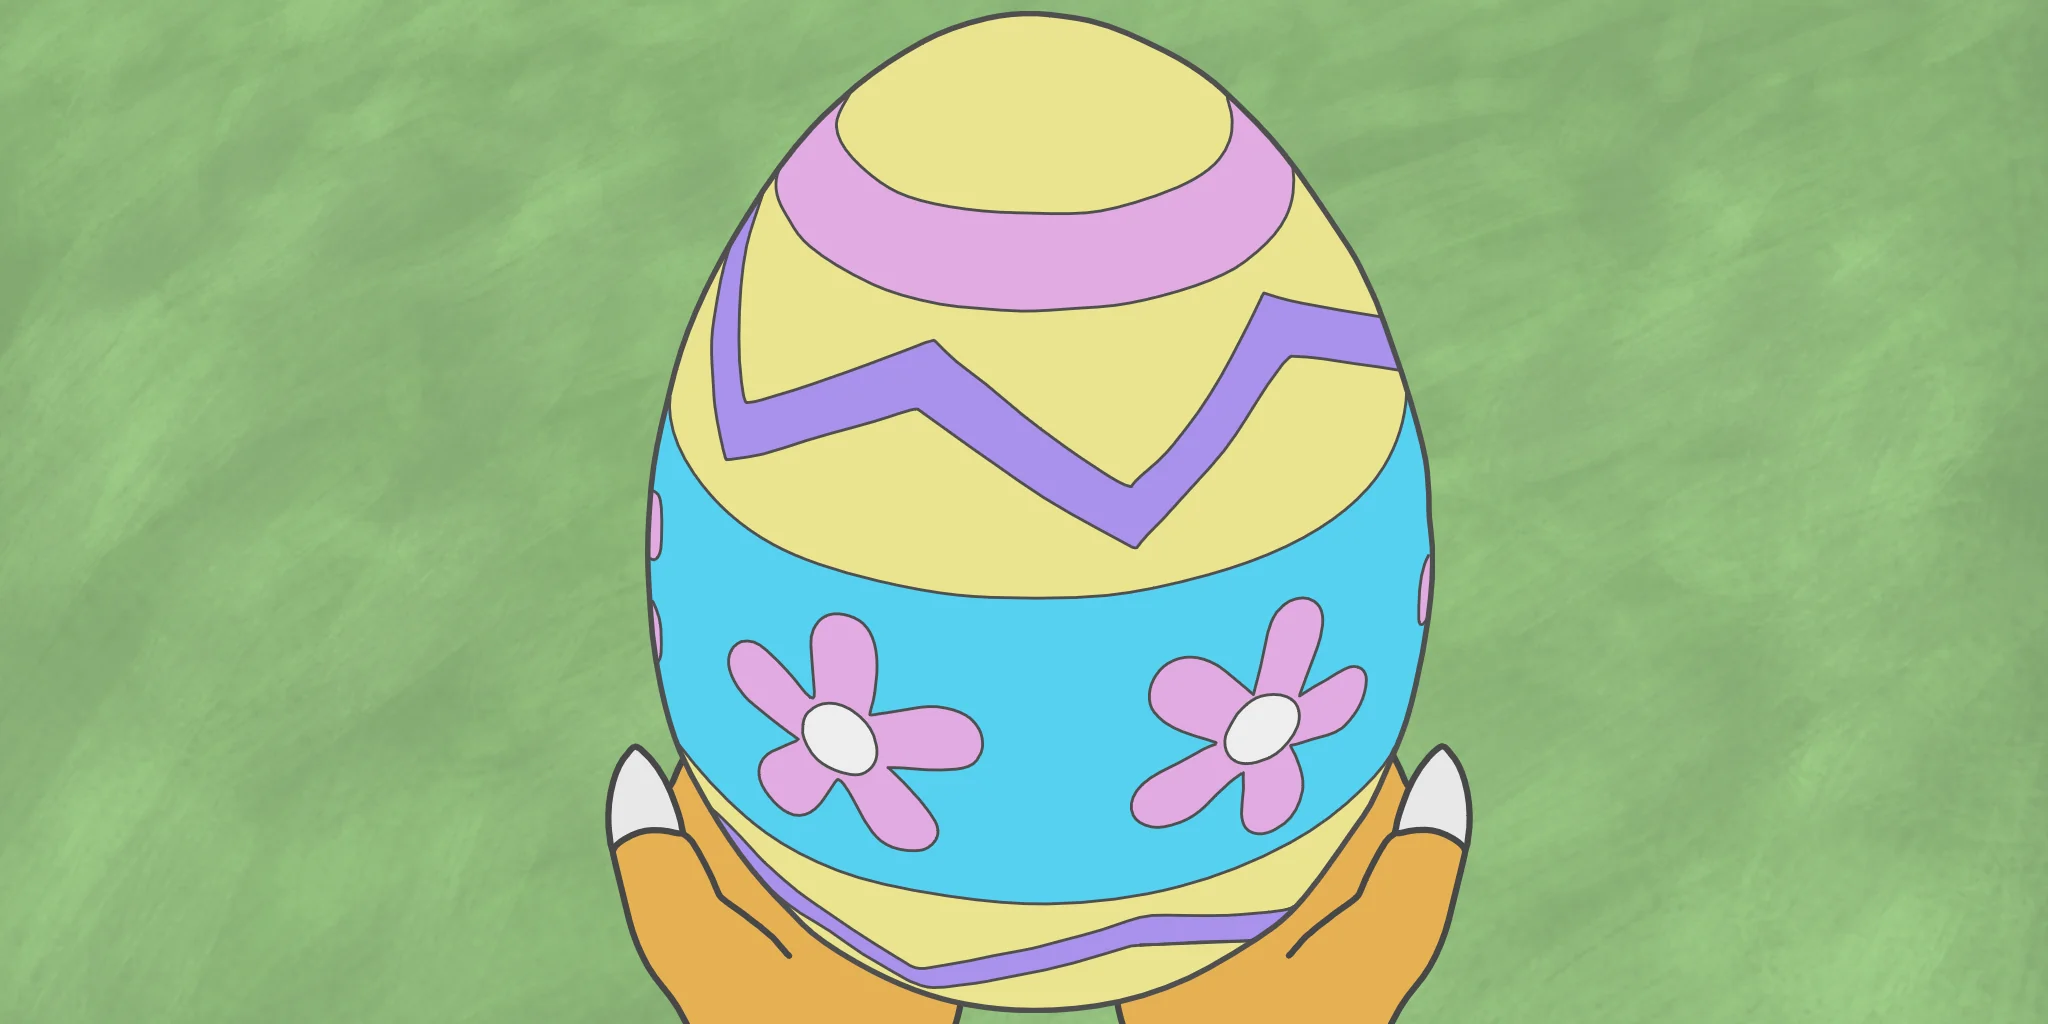 A small dragon hatches out of a giant Easter egg.